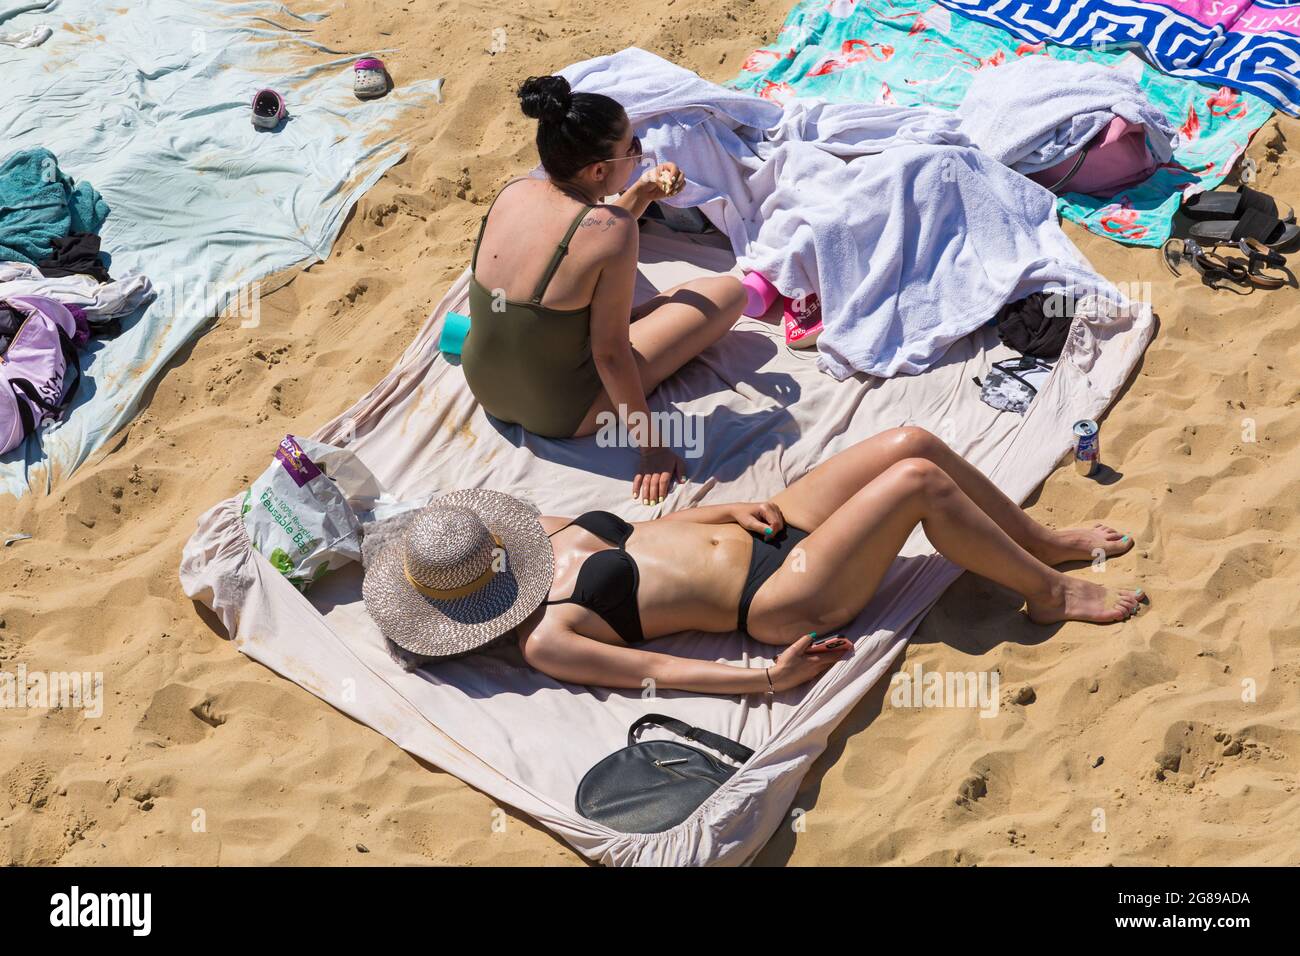 Bournemouth, Dorset UK. 18th July 2021. UK weather: hot sunny day at Bournemouth beach on the South Coast, as crowds flock to the seaside and sunseekers enjoy the sunshine in the heatwave. Beaches are packed with barely a spare space and car parks full.  Credit: Carolyn Jenkins/Alamy Live News Stock Photo